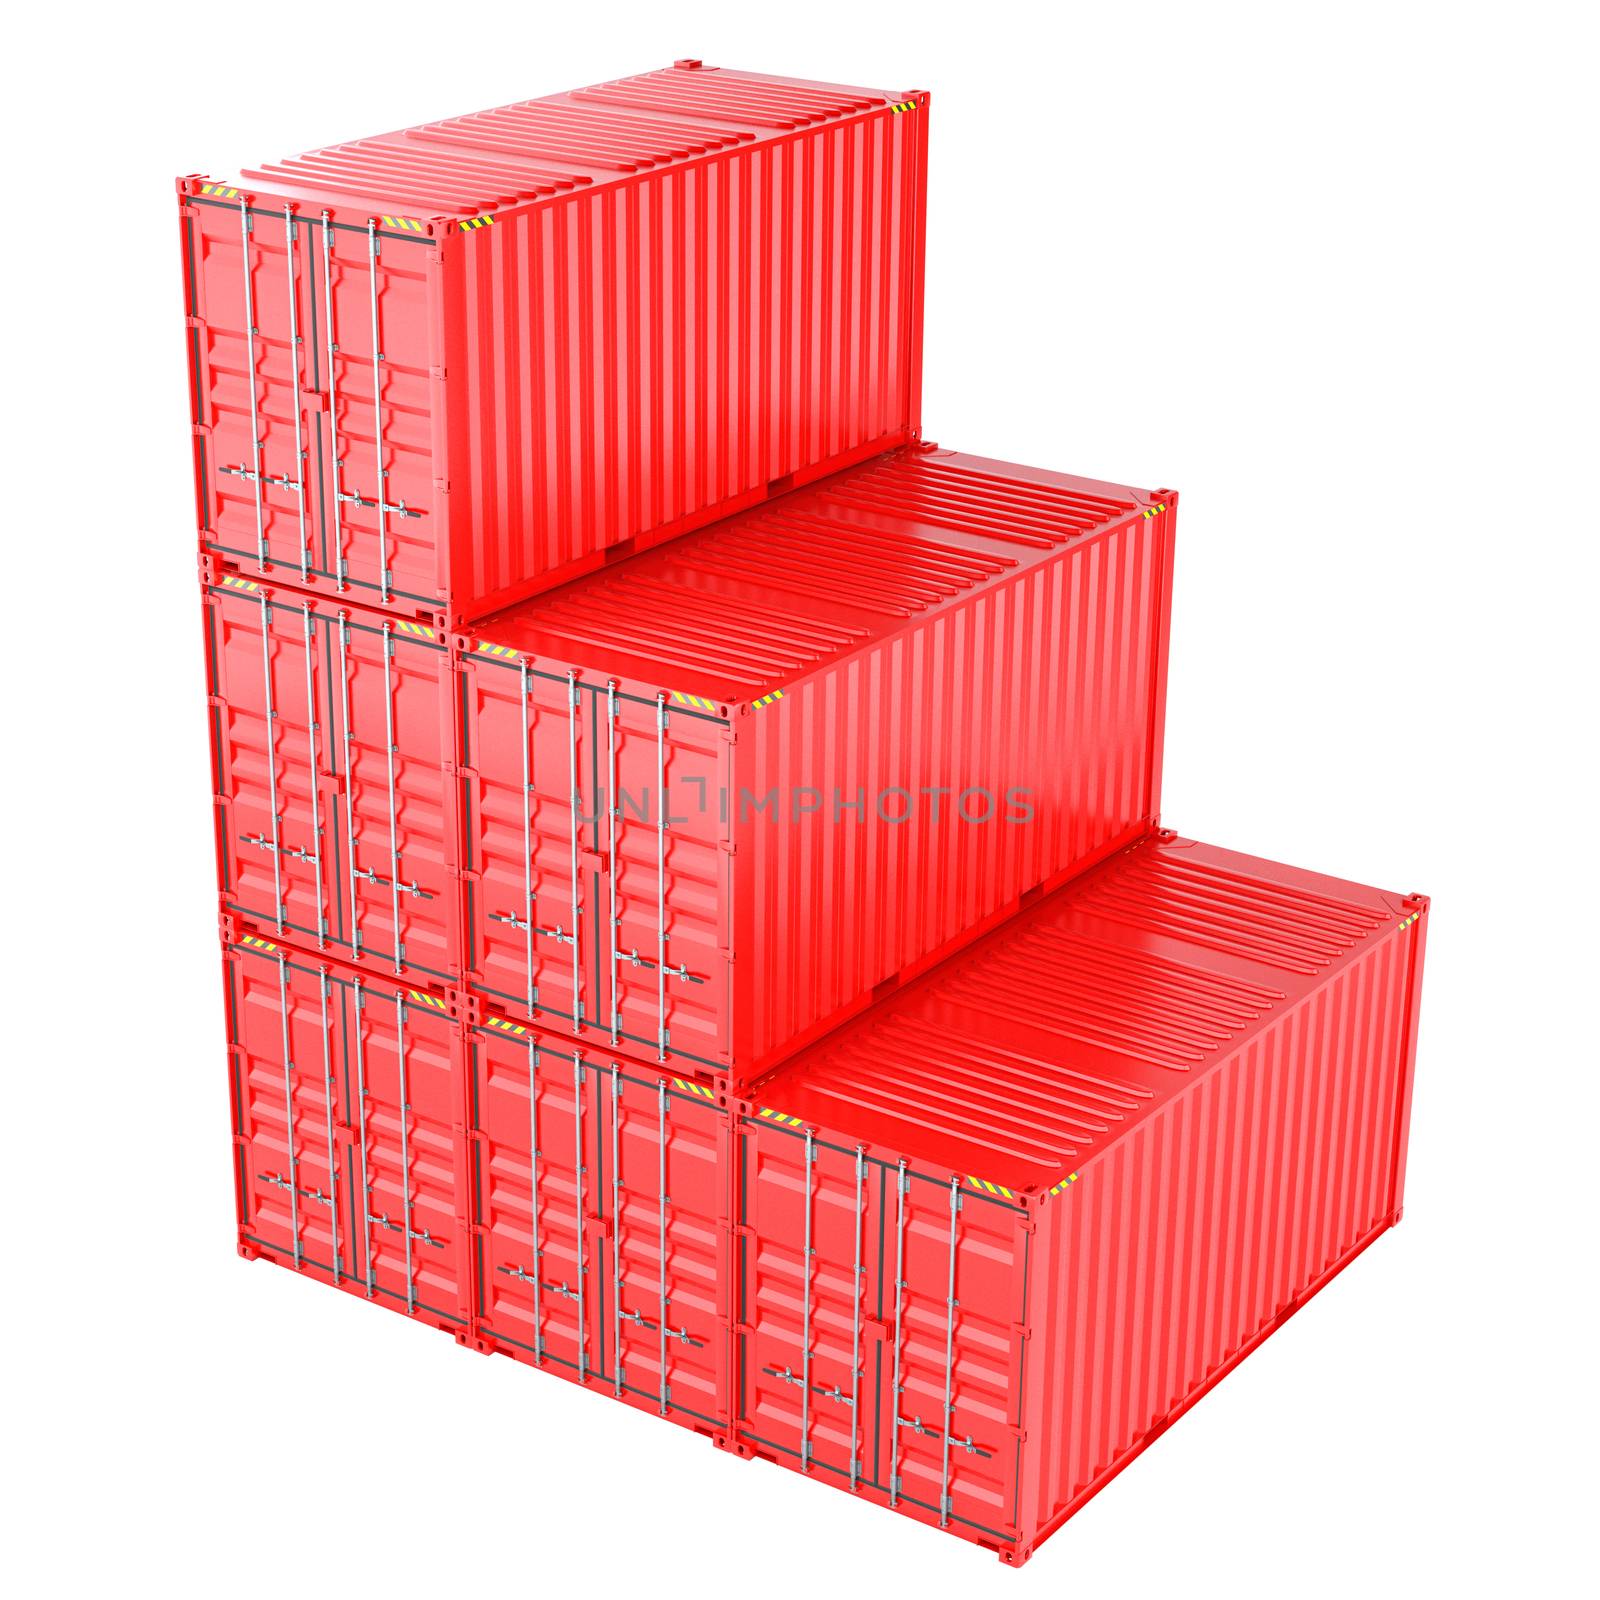 A Stack of Cargo Containers for Overseas Shipping by cherezoff